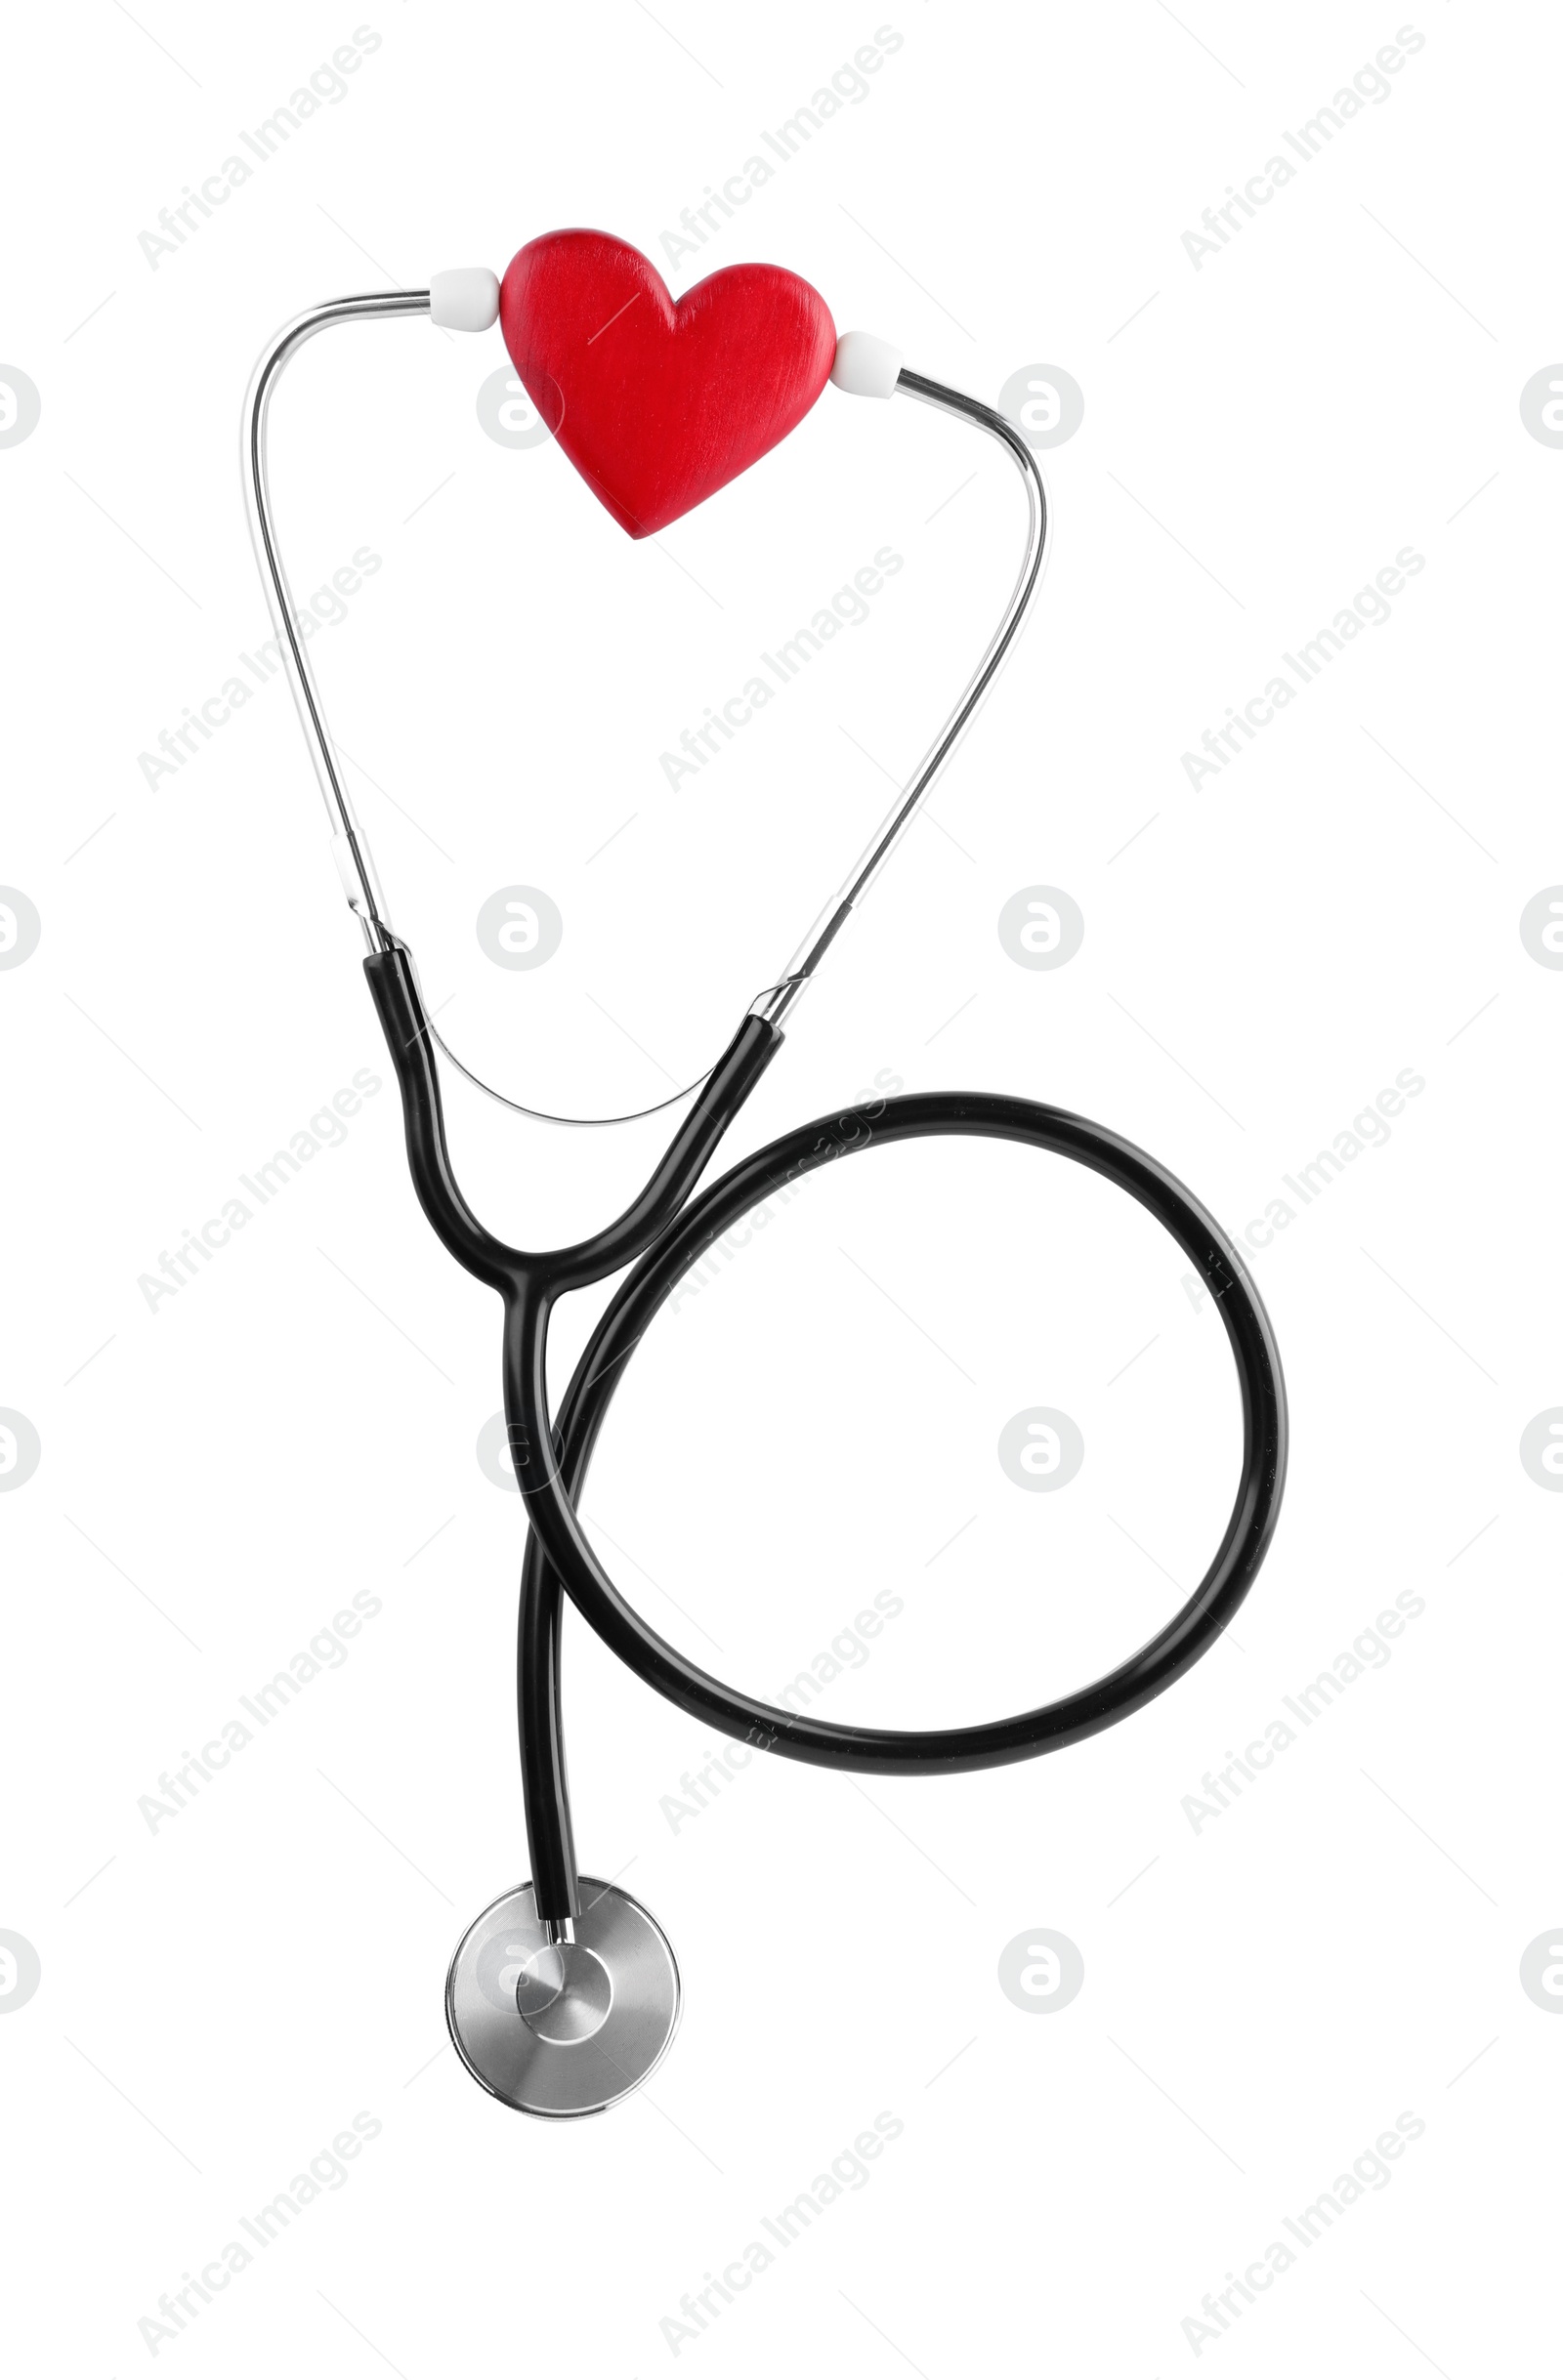 Photo of Stethoscope with red heart on white background, top view